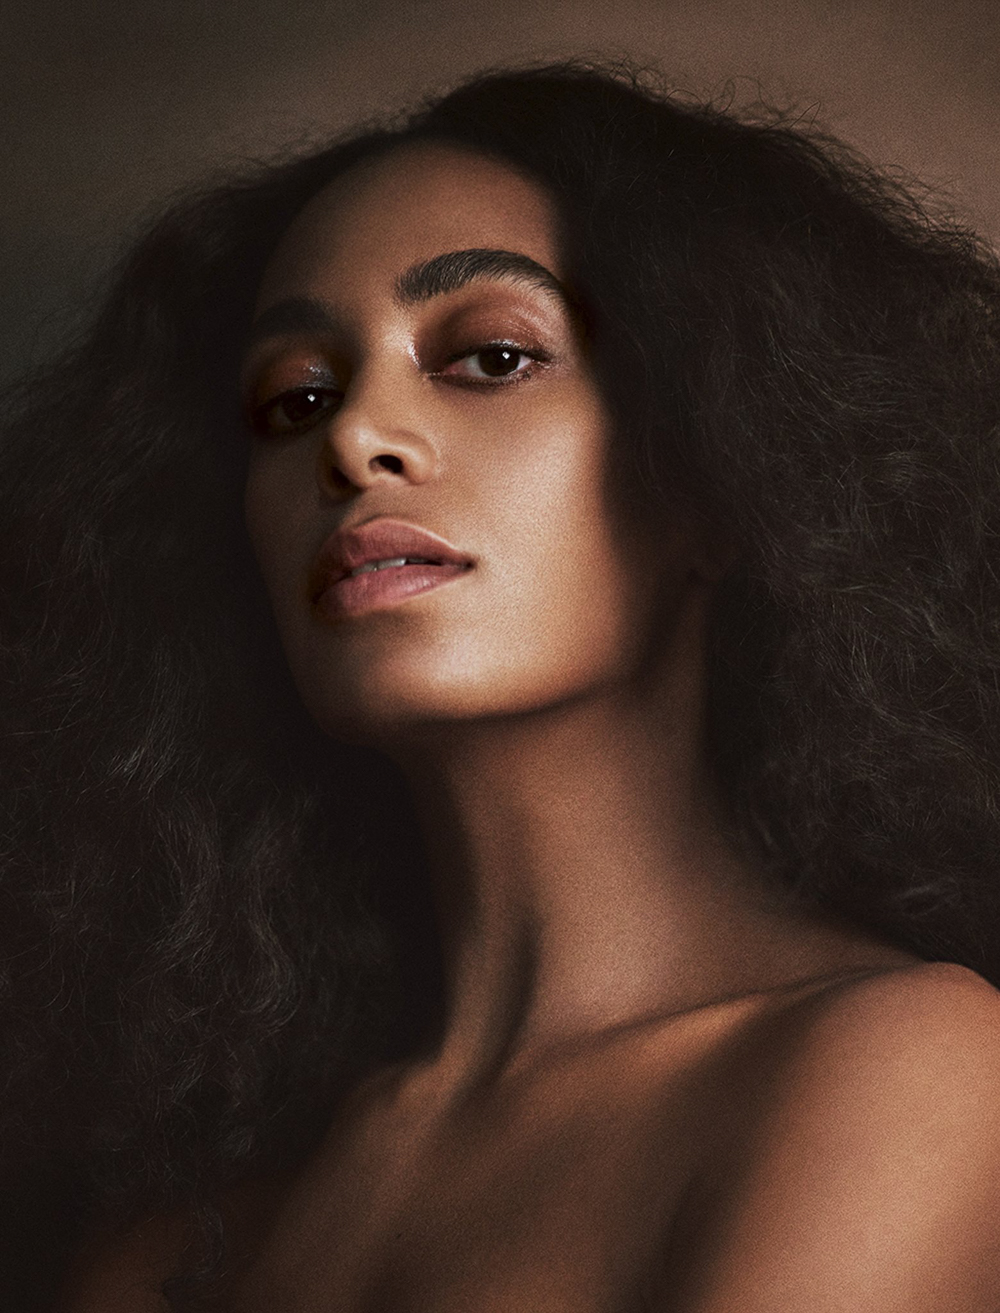 Interview-Magazine-February-2017-Solange-Knowles-by-Mikael-Jansson-1.jpg